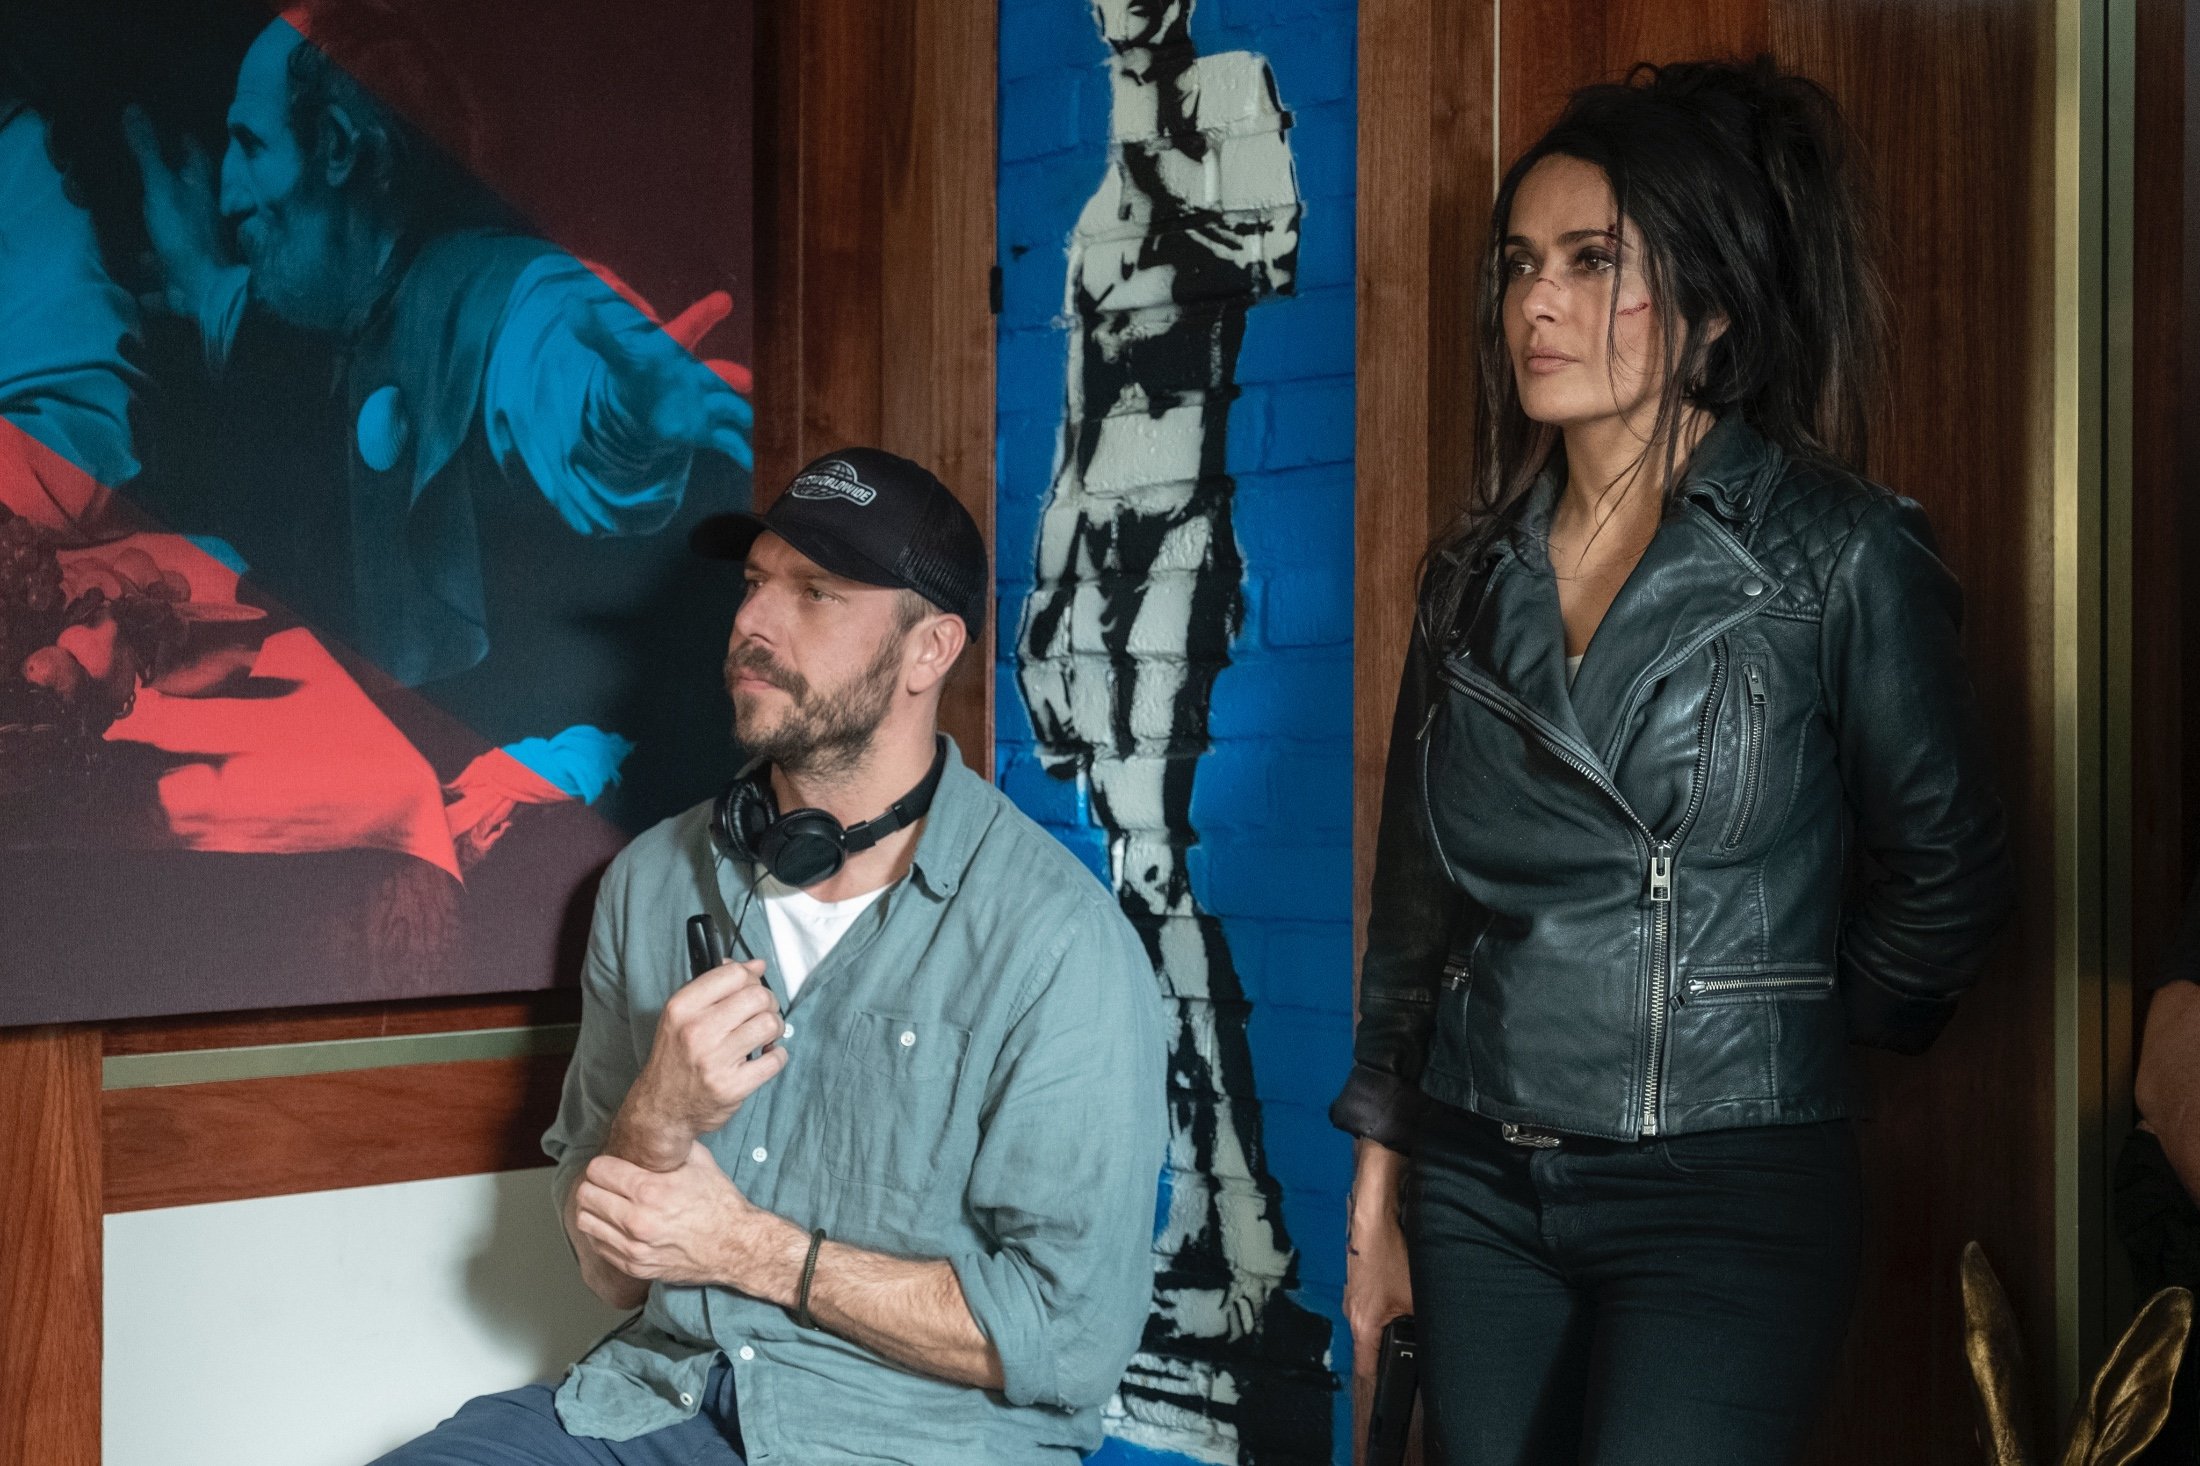 Salma Hayek (R) stands next to director Patrick Hughes on the set of the movie, "The Hitman